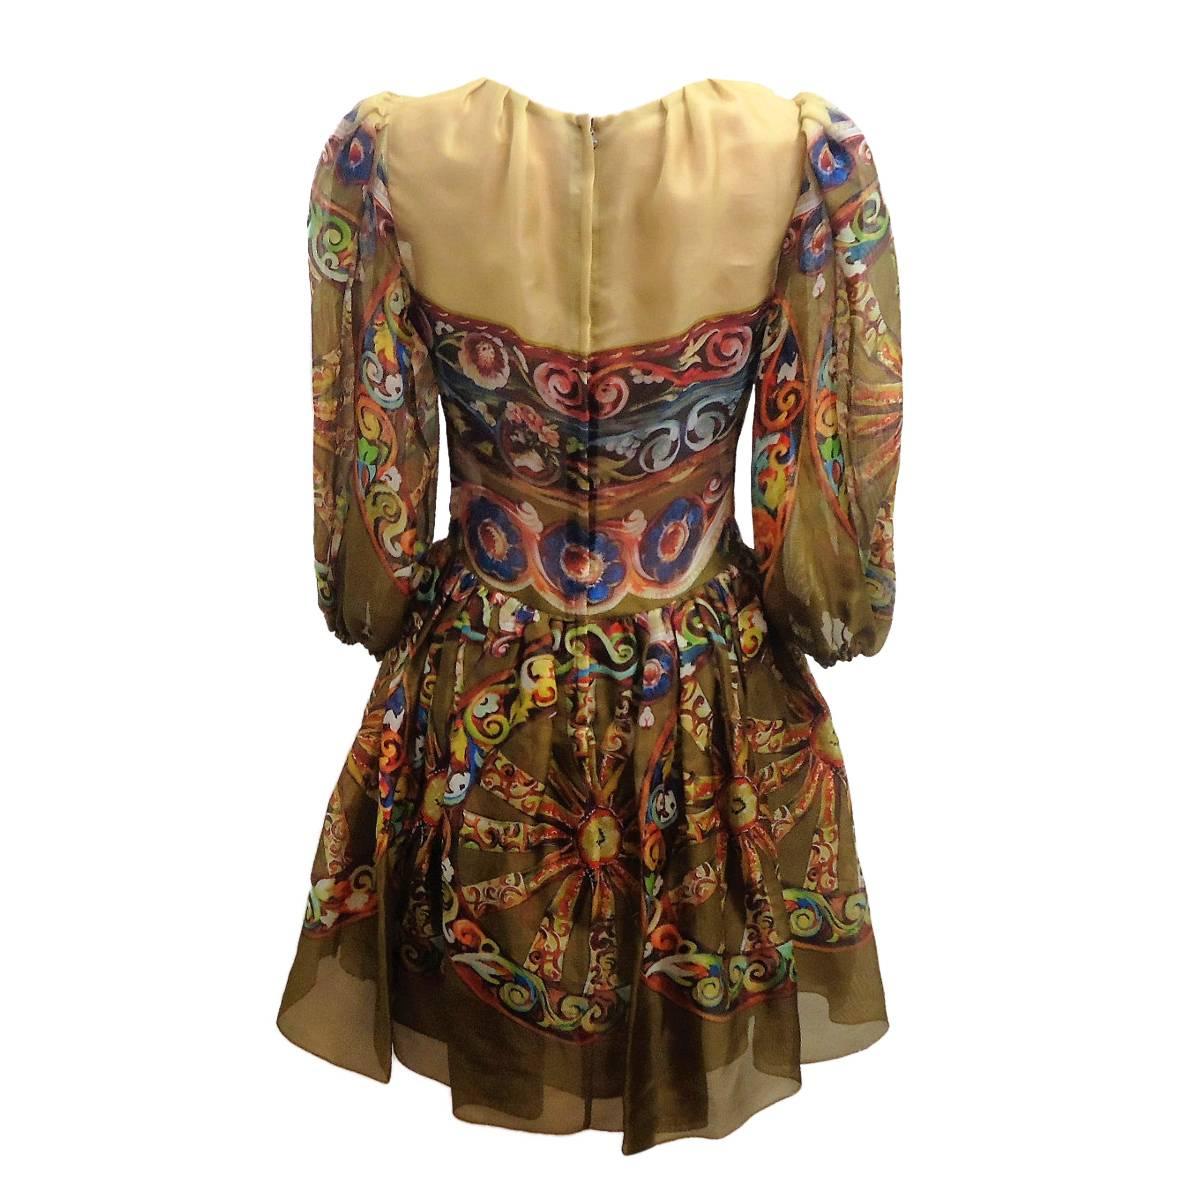 Wonderful, amazing Dolce & Gabbana défilé dress
2013 Spring Summer Collection
Floral pattern with large sicilian cart
Mustard green color base
3/4 Sleeve
With undervest
Total lenght (shoulder/hem) cm 88 (34.6 inches)
Brand tag was cut by